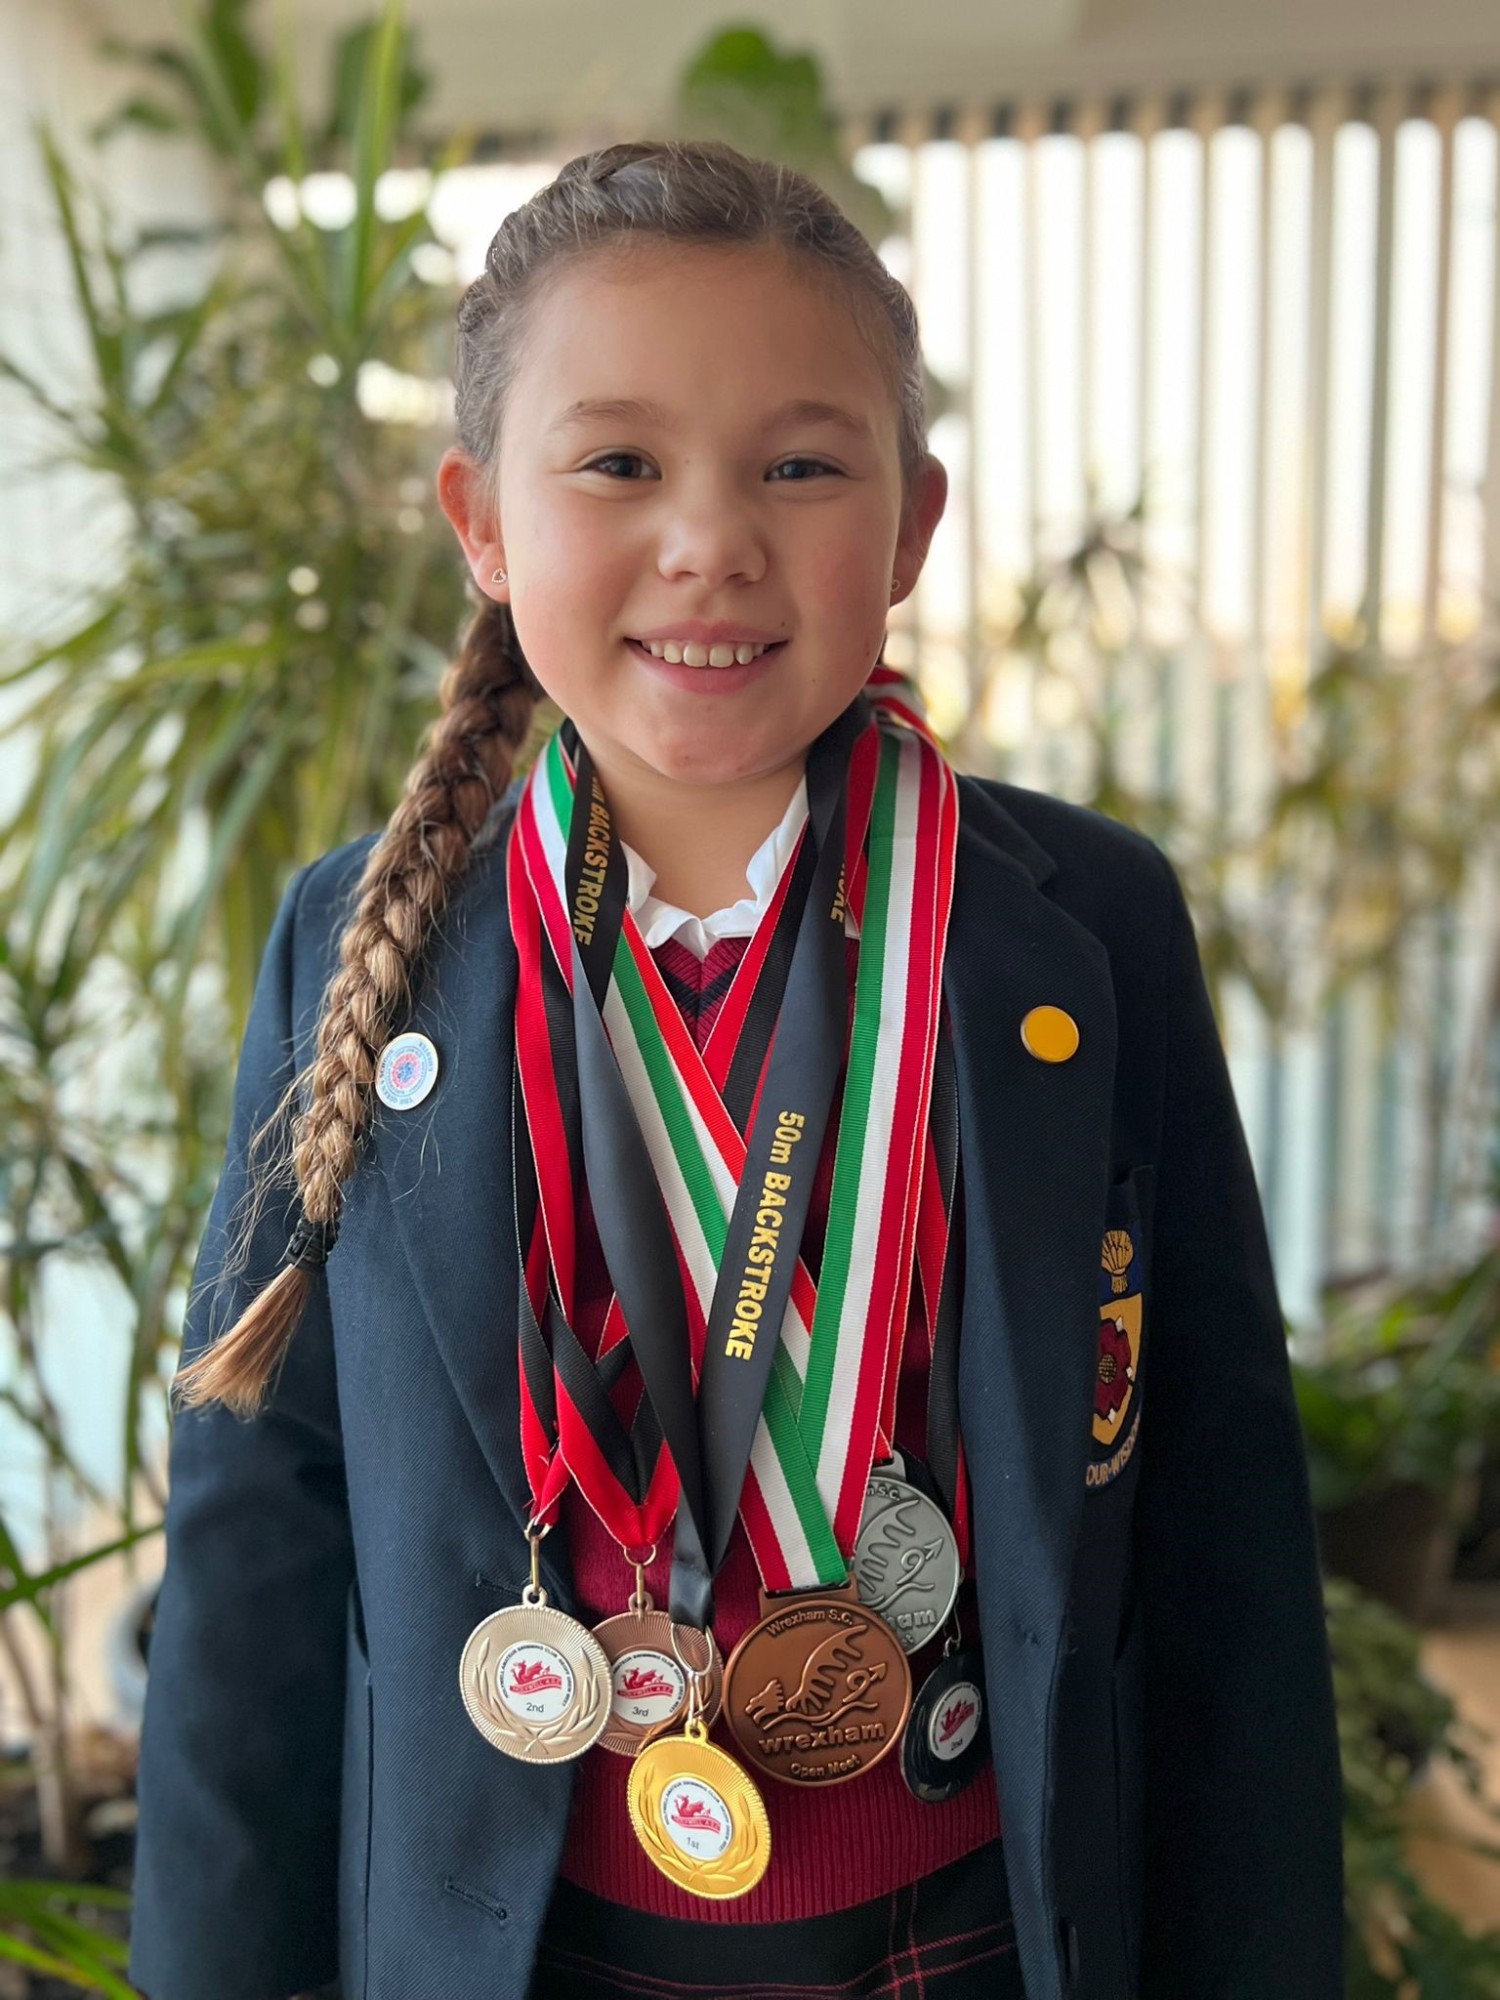 Amber wearing her medals